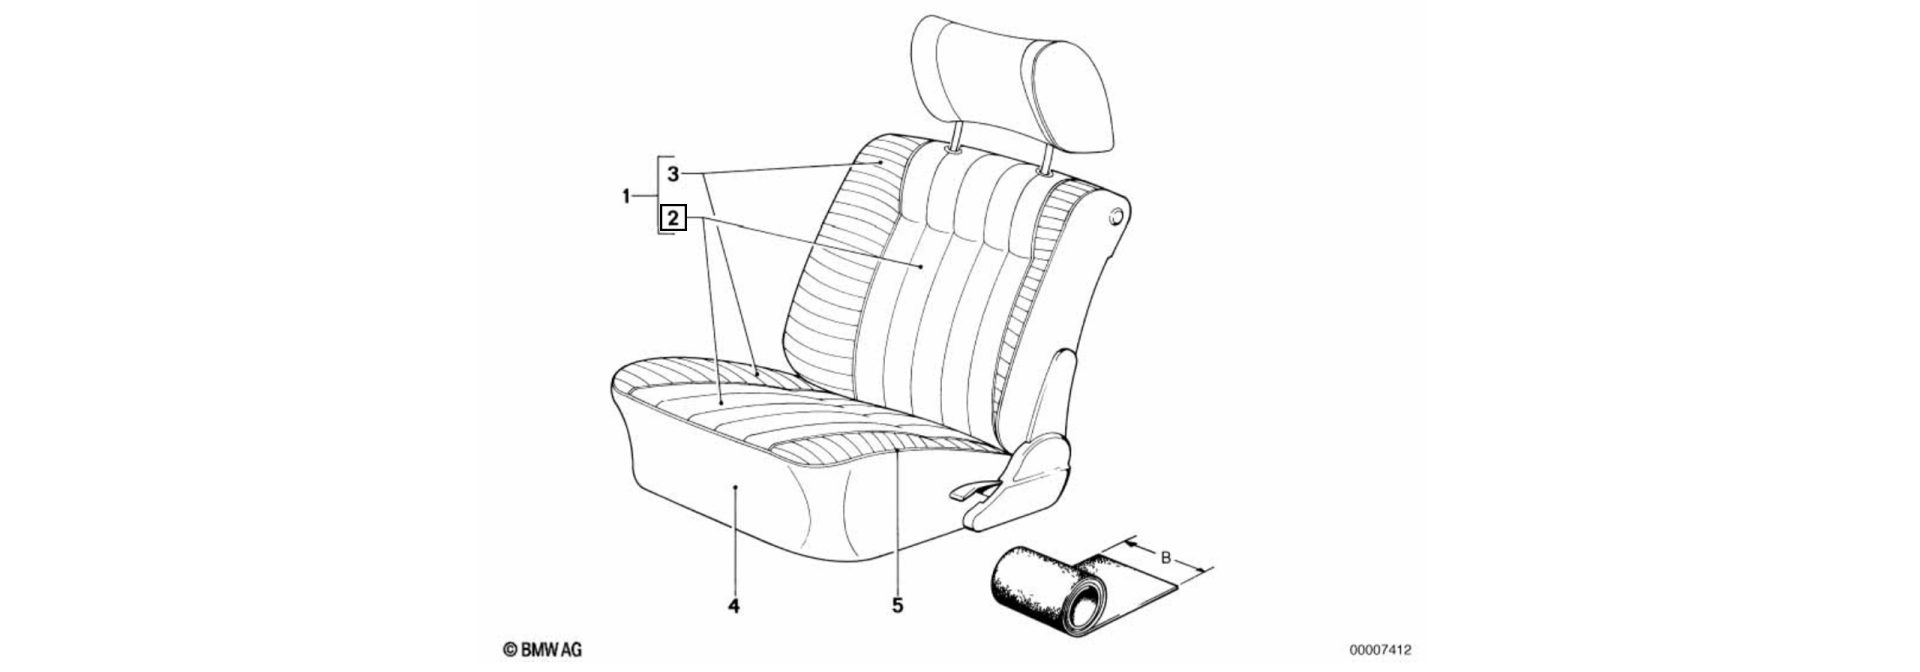 Upholstery cloth exploded-view drawing